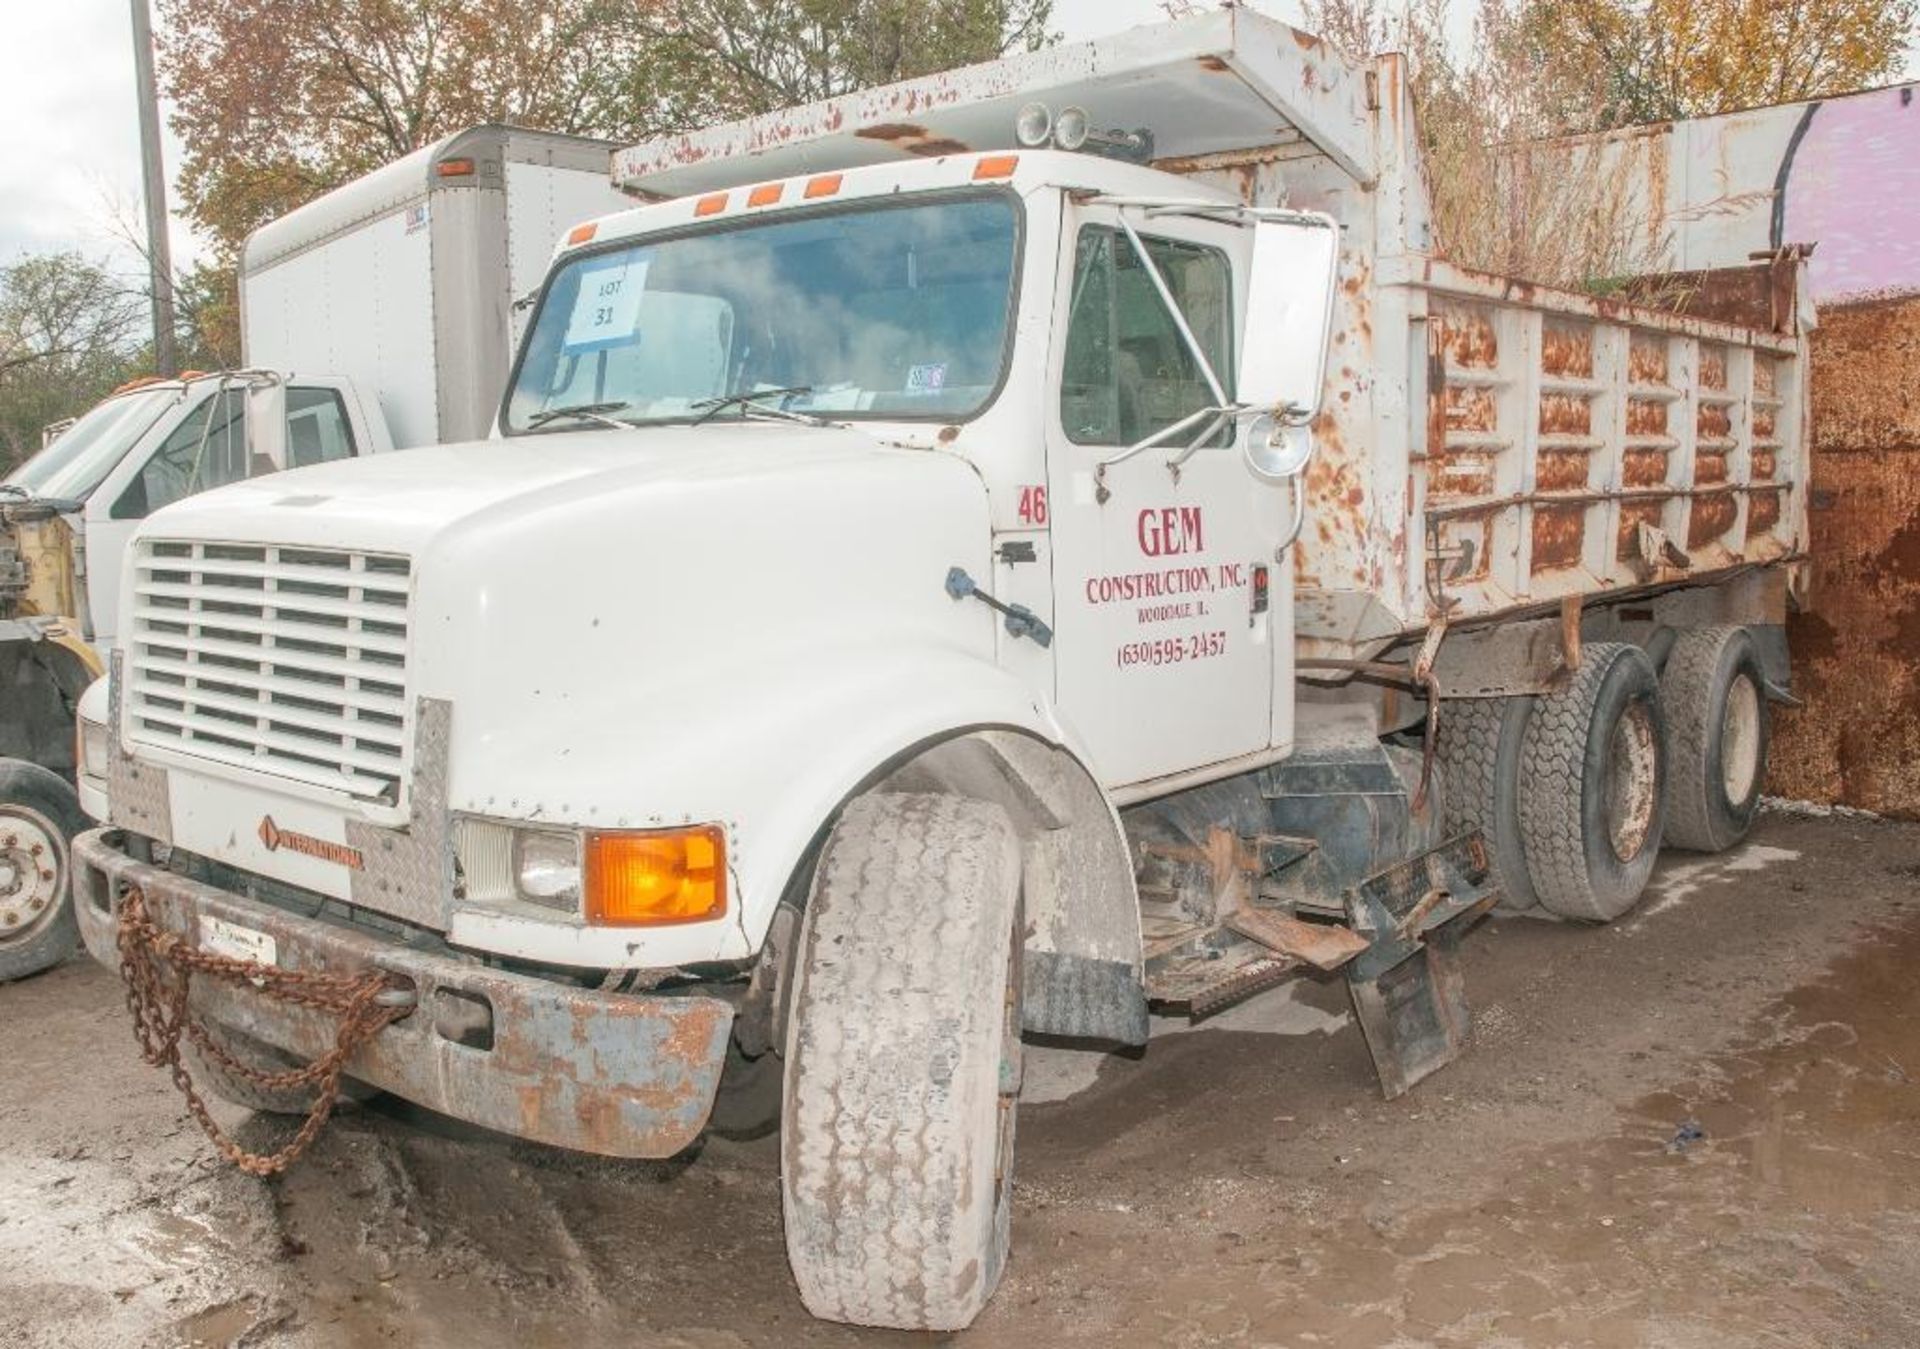 1990 International Model 4900 6x4 Conventional Cab and Chassis; VIN 1HTSHZ3T3LH660246; 17" Dump Body - Image 2 of 4